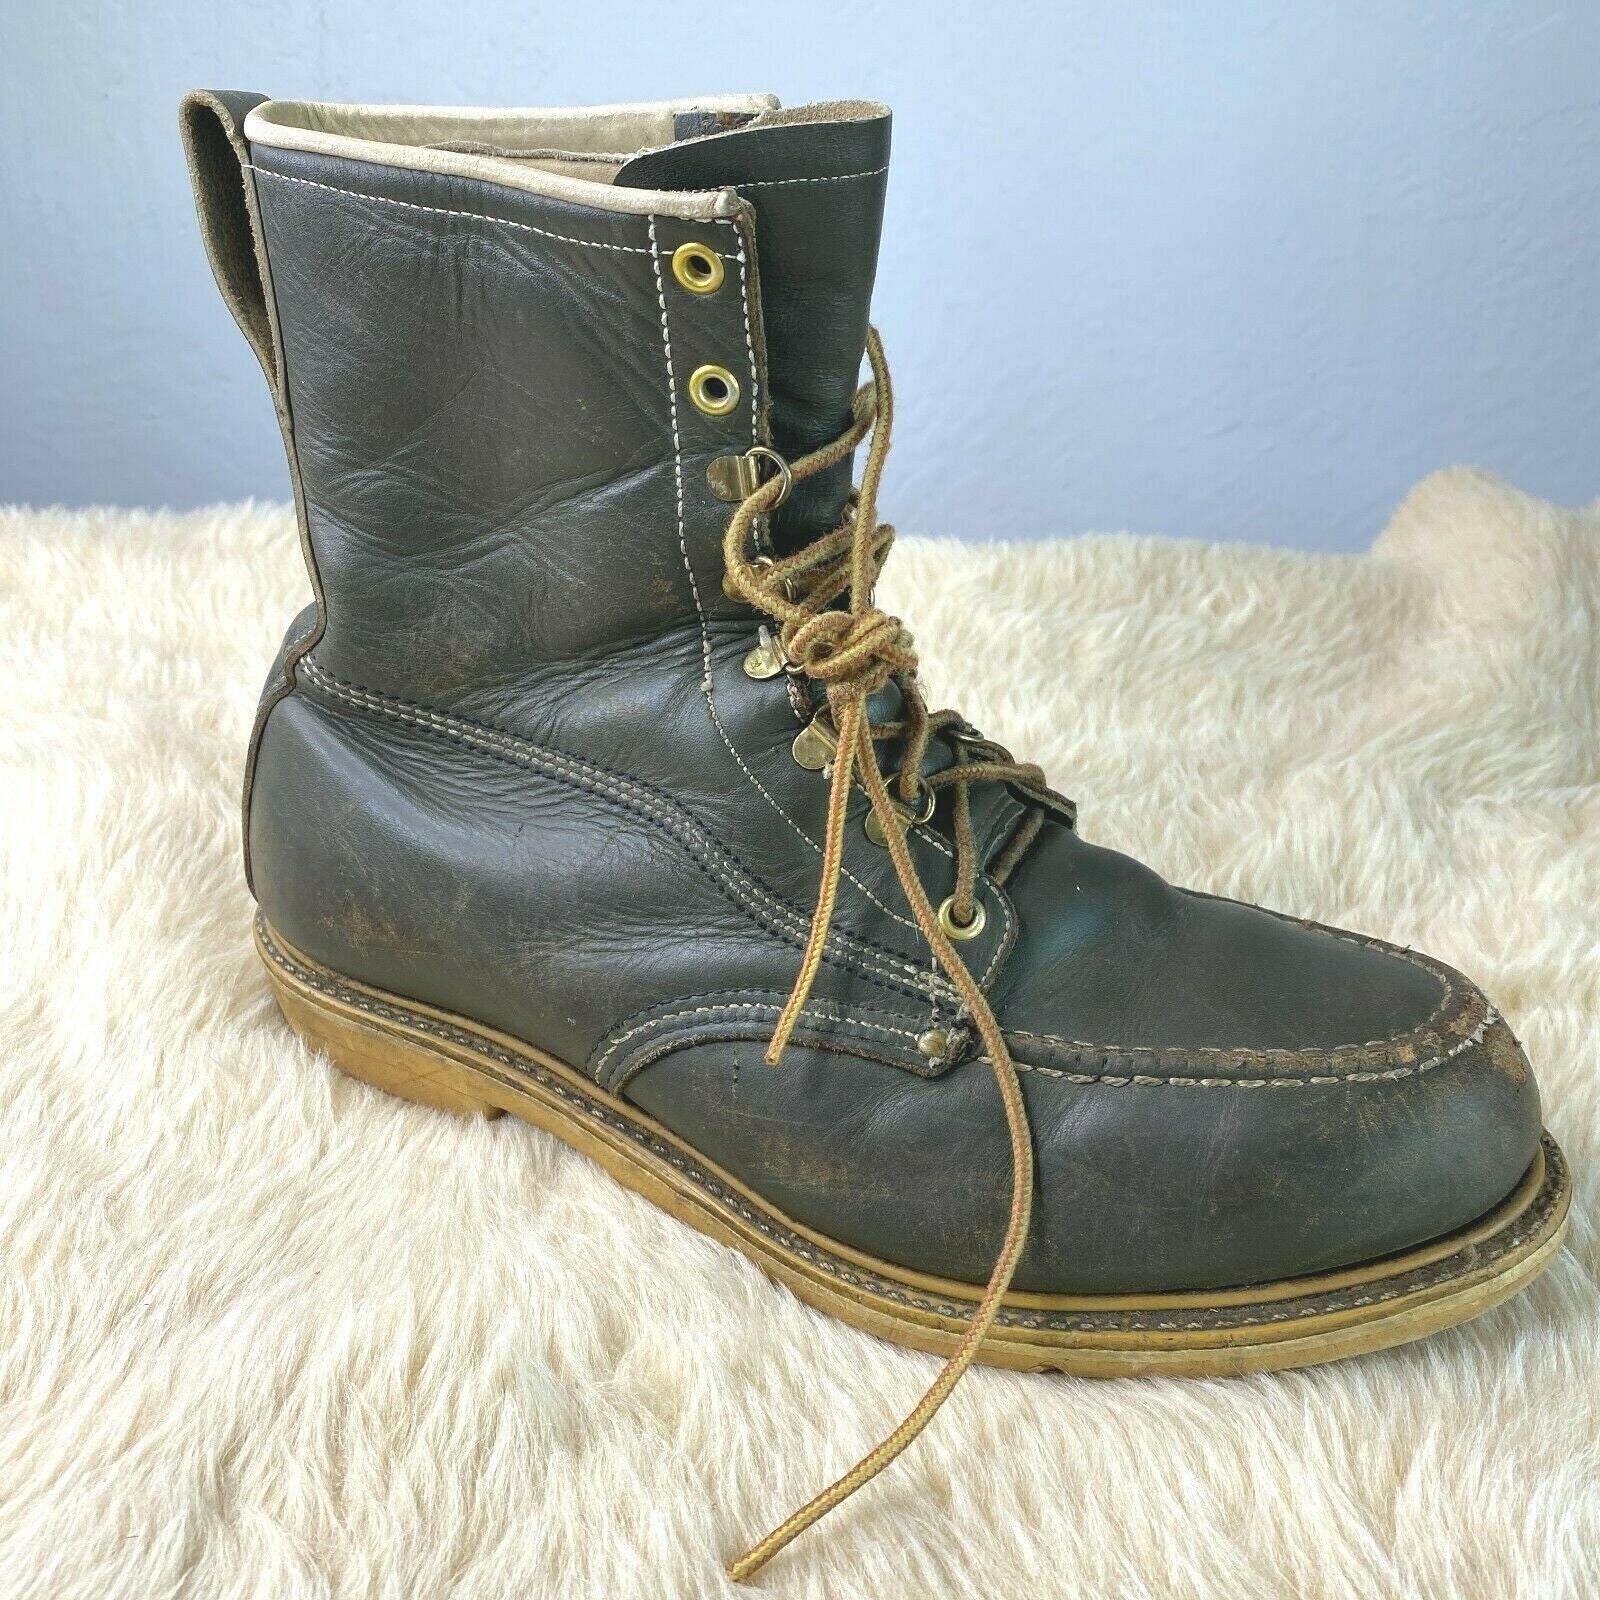 Lineman Boots for sale compared to CraigsList | Only 4 left at -60%